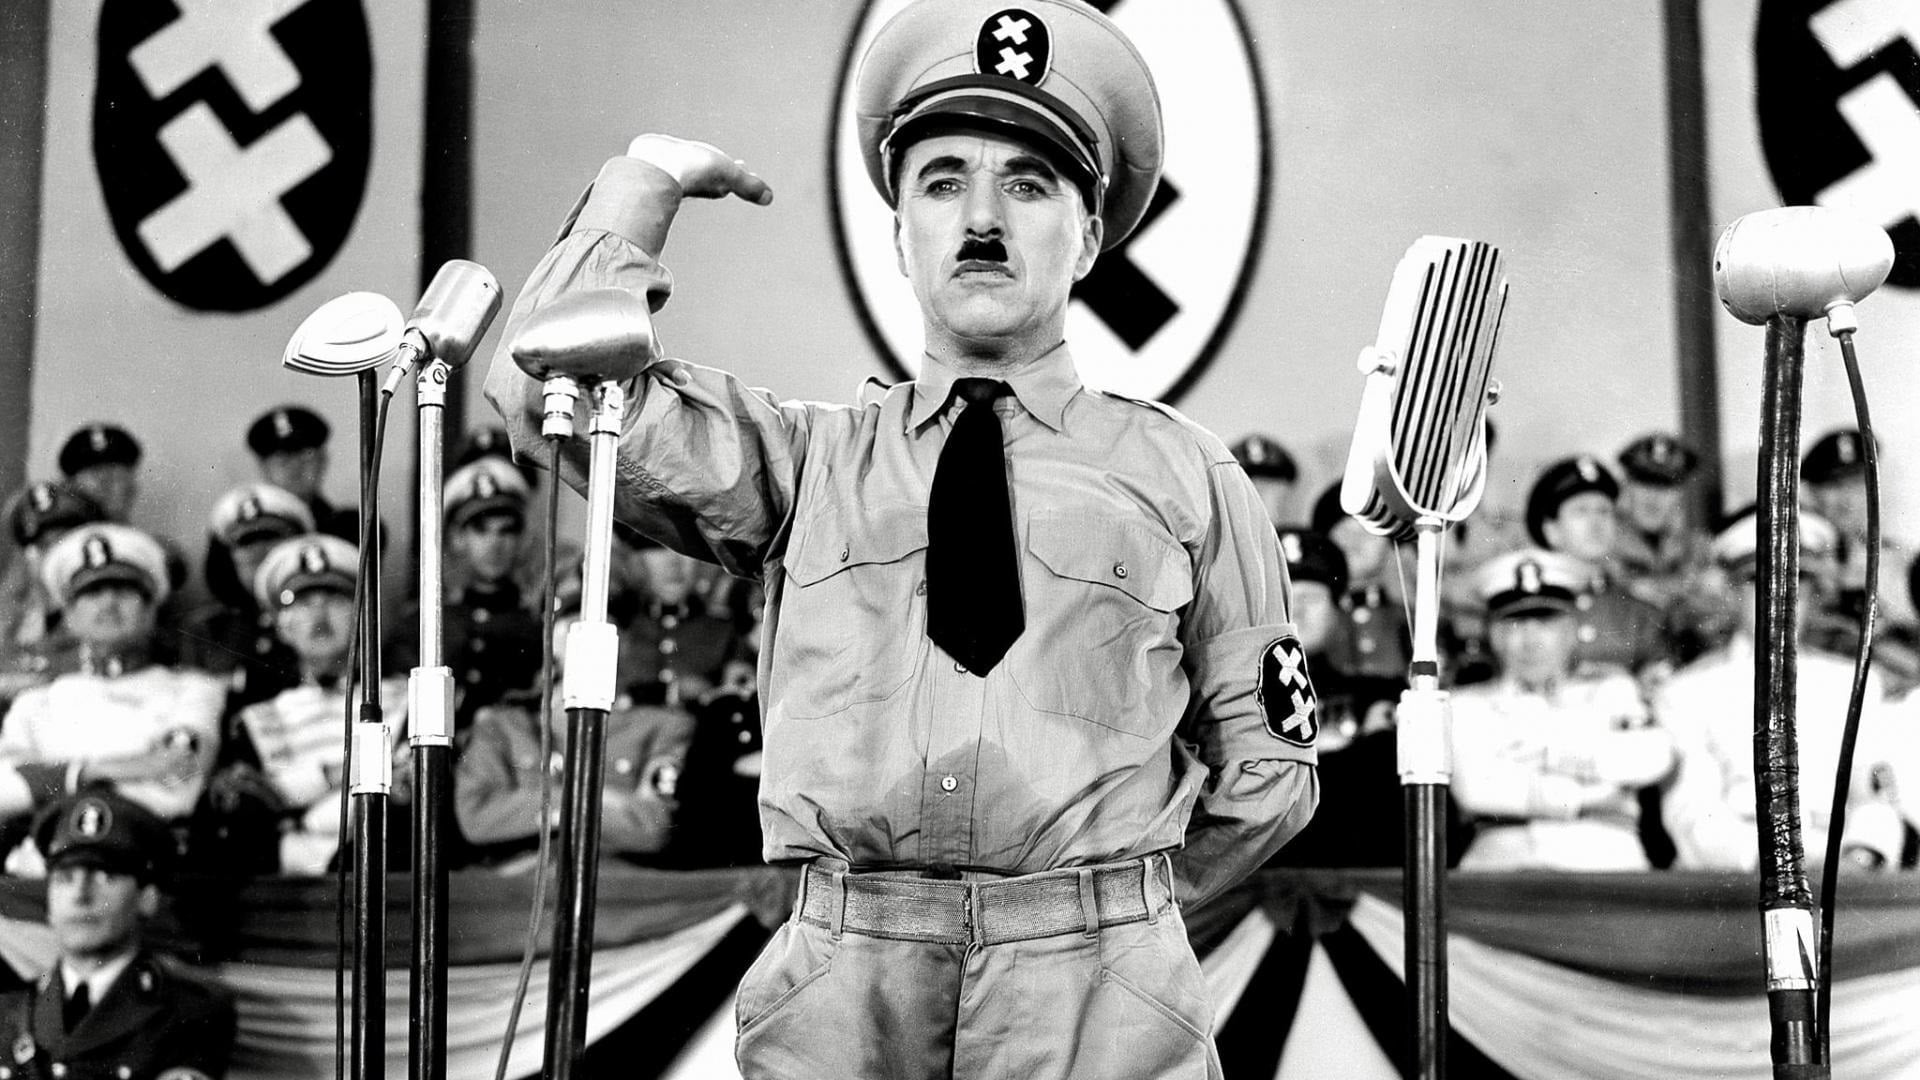 The Great Dictator - The Great Dictator